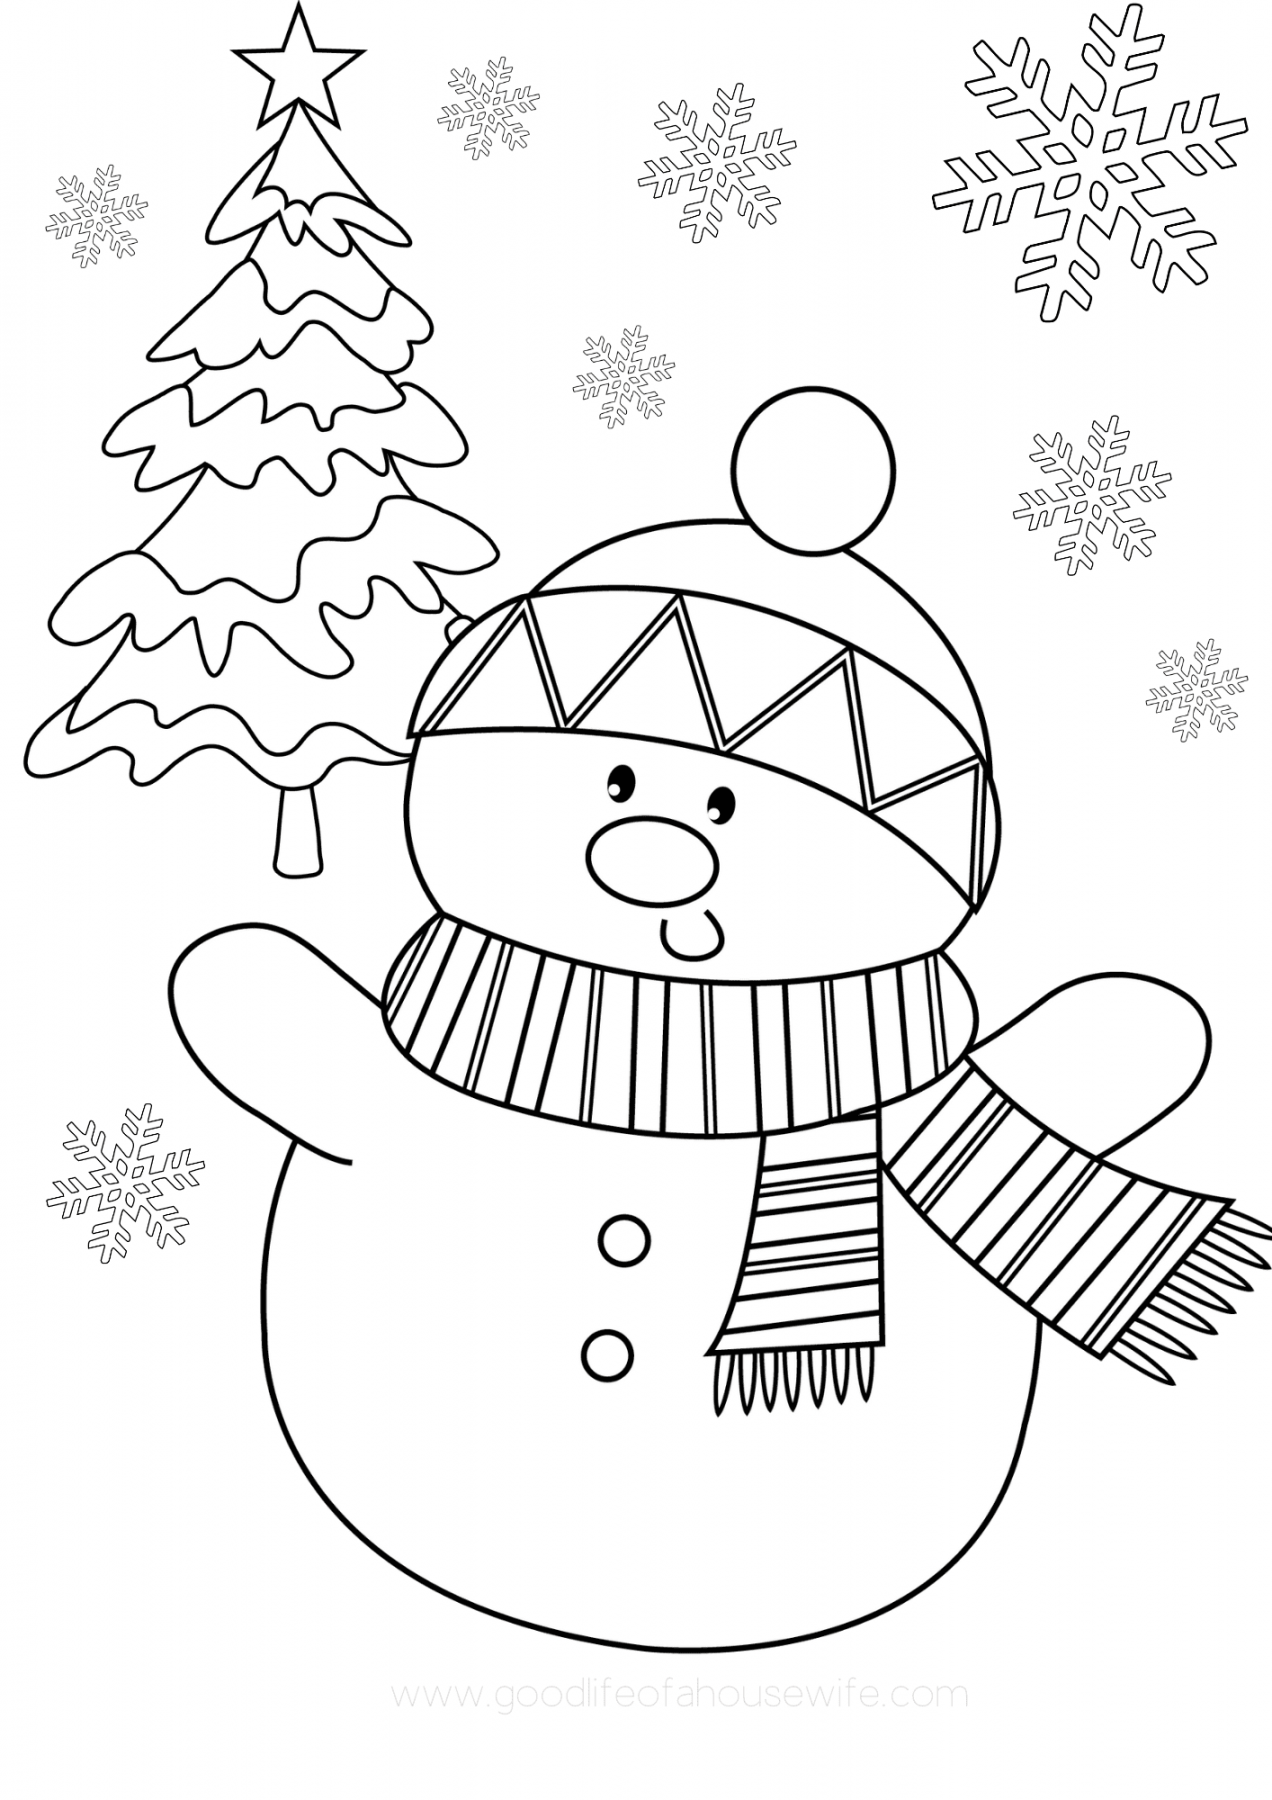 Free Printable Christmas Coloring Pages - Printable - Free Printable Christmas Coloring Pages - Good Life of a Housewife